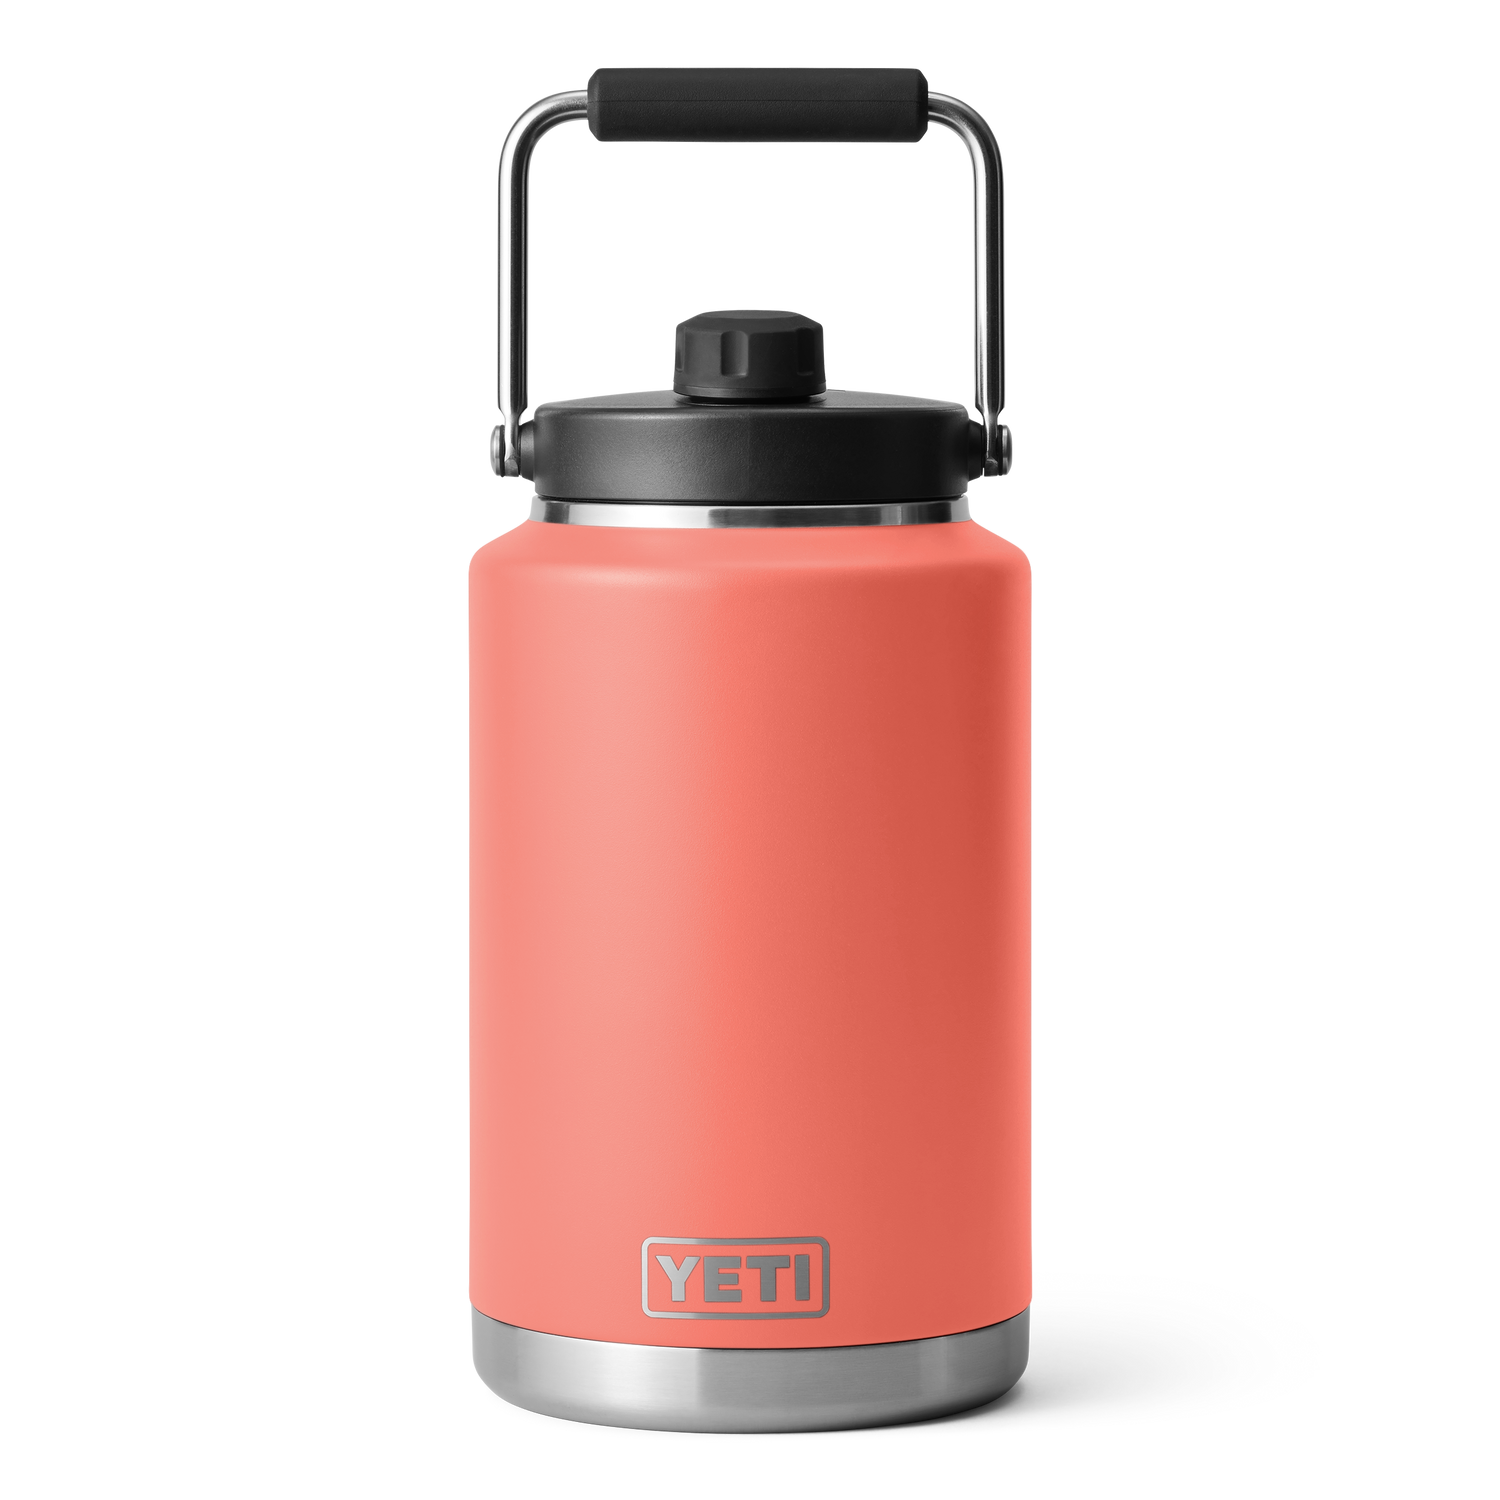 Keep Your Drinks @ the Perfect Temperature with Nordic Thermos Bottle!